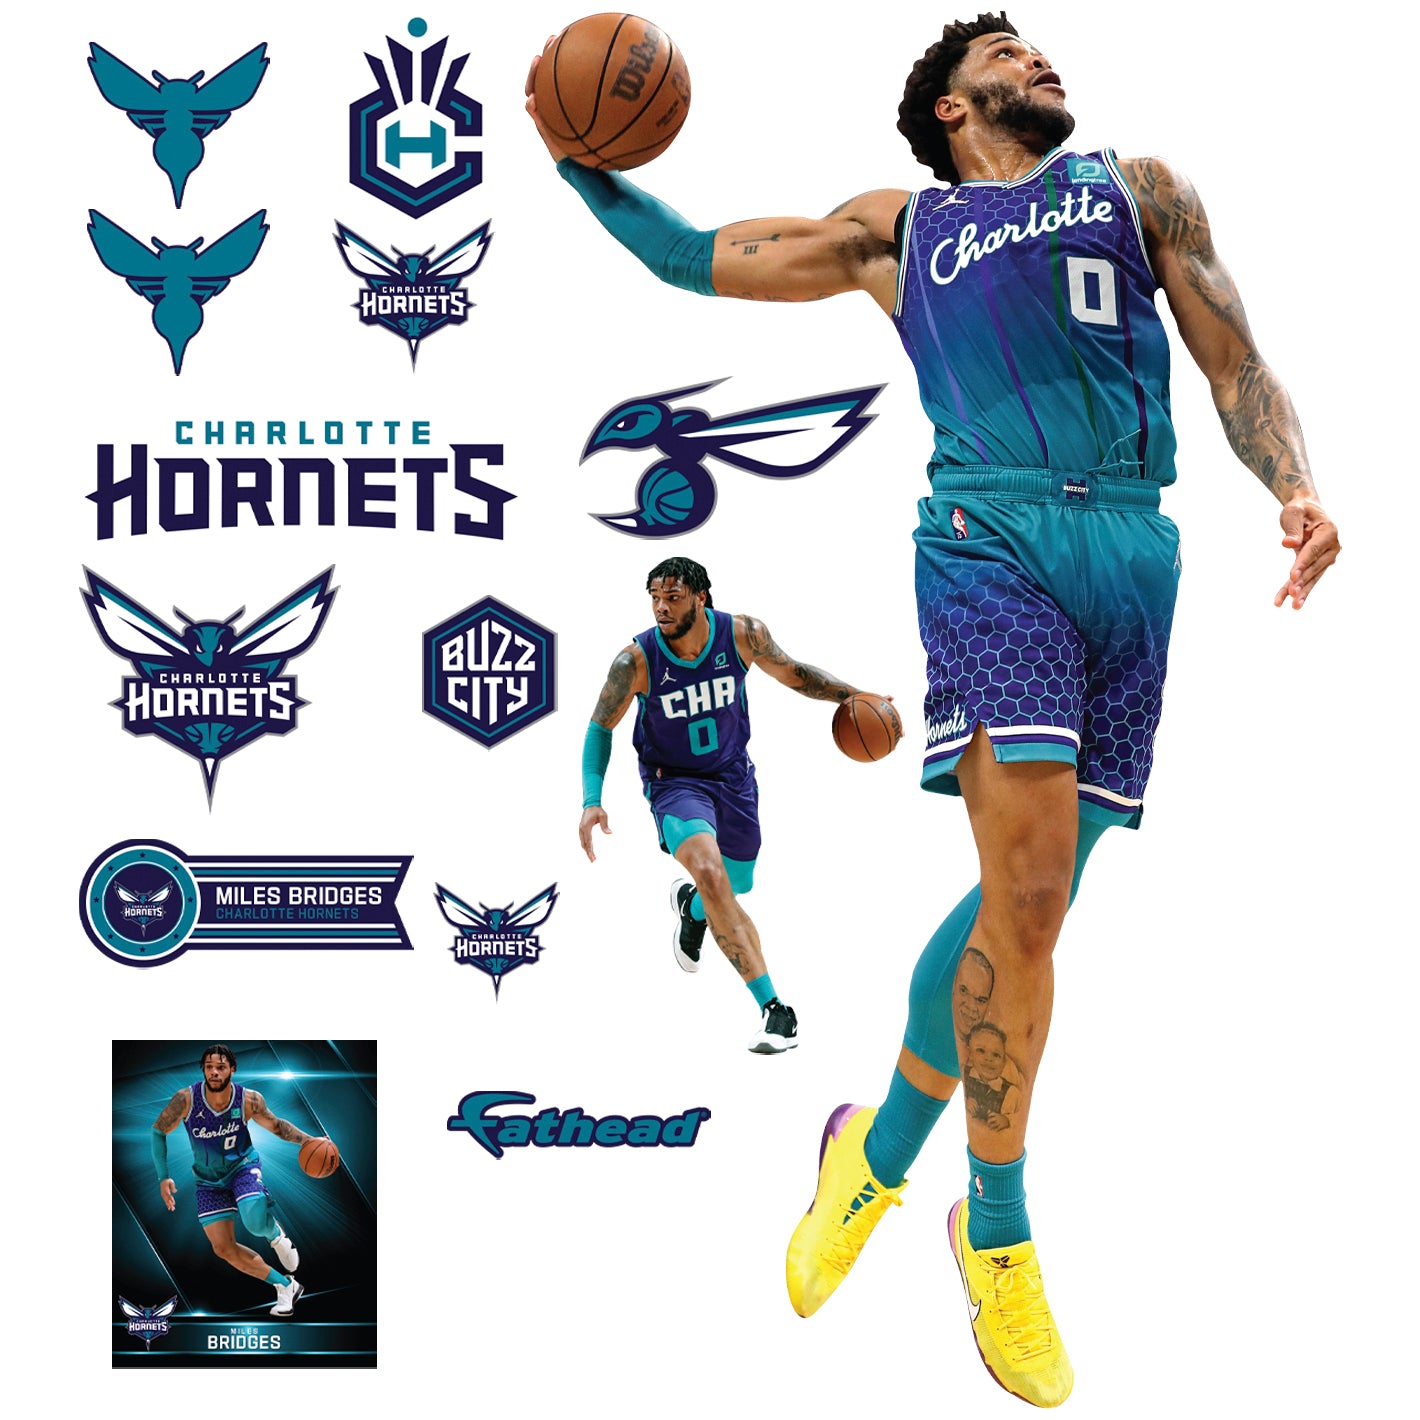 Buzz City Jersey Concept : r/CharlotteHornets